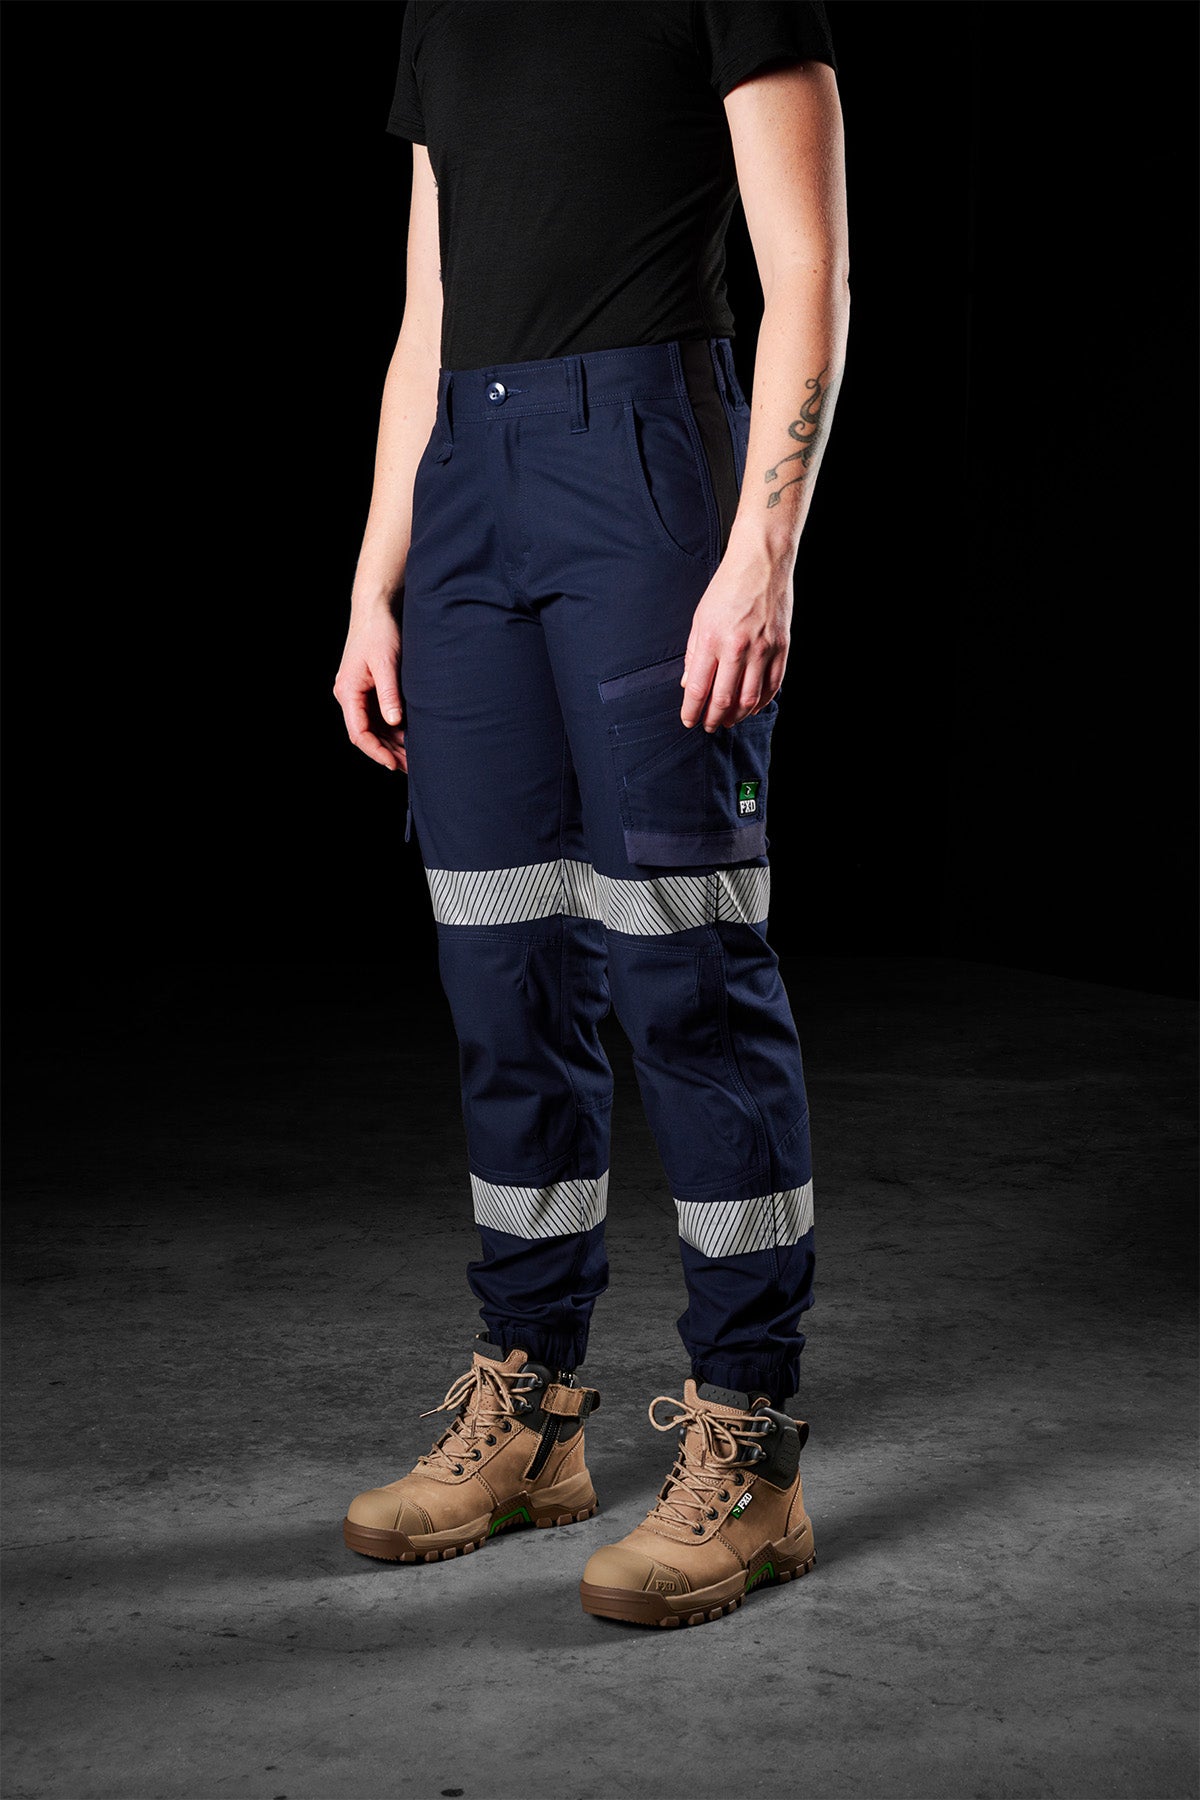 Hip Pocket Workwear & Safety - FXD WOMENS WP.4W STRETCH CUFFED WORK PANTS  ARE FIT AND TRADE TESTED FOR WOMEN, BY WOMEN, FUNCTION BY DESIGN. FXD WOMENS  WP.4W STRETCH CUFFED WORK PANTS